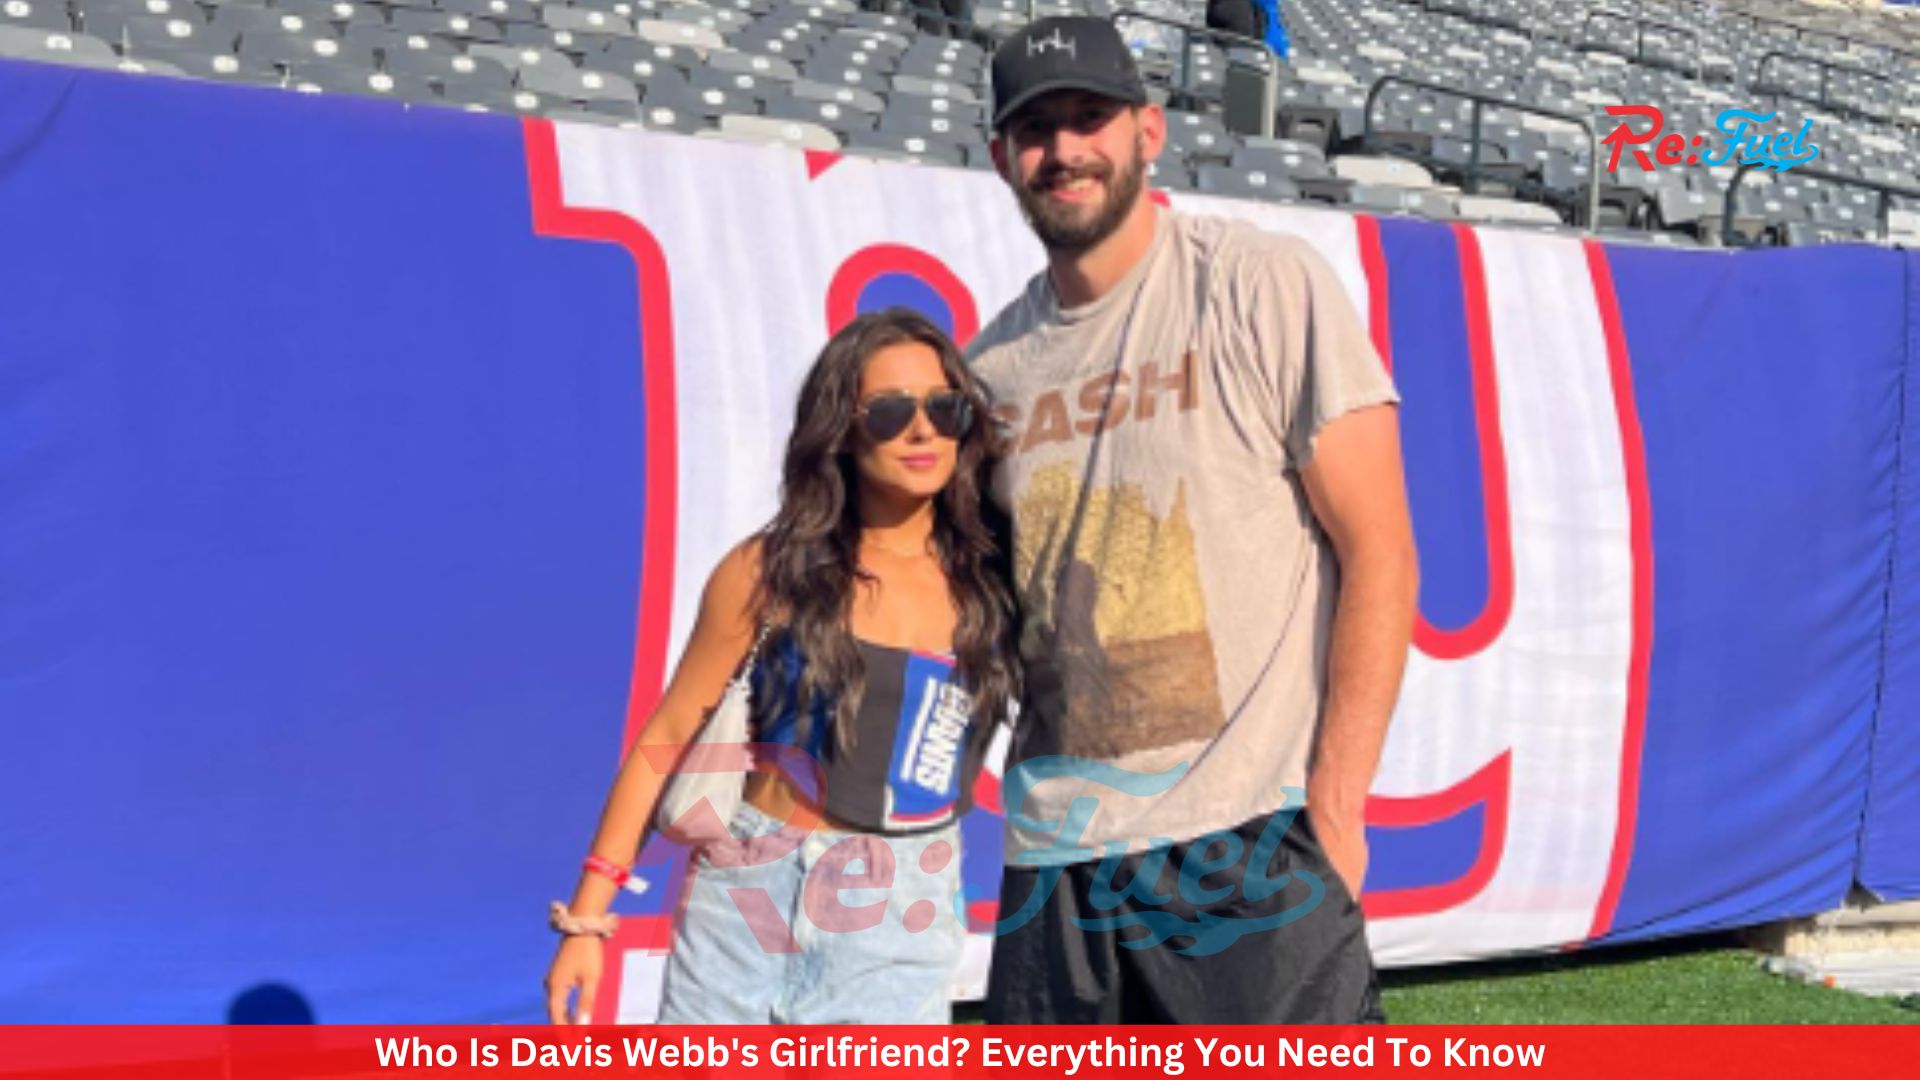 Who Is Davis Webb's Girlfriend? Everything You Need To Know